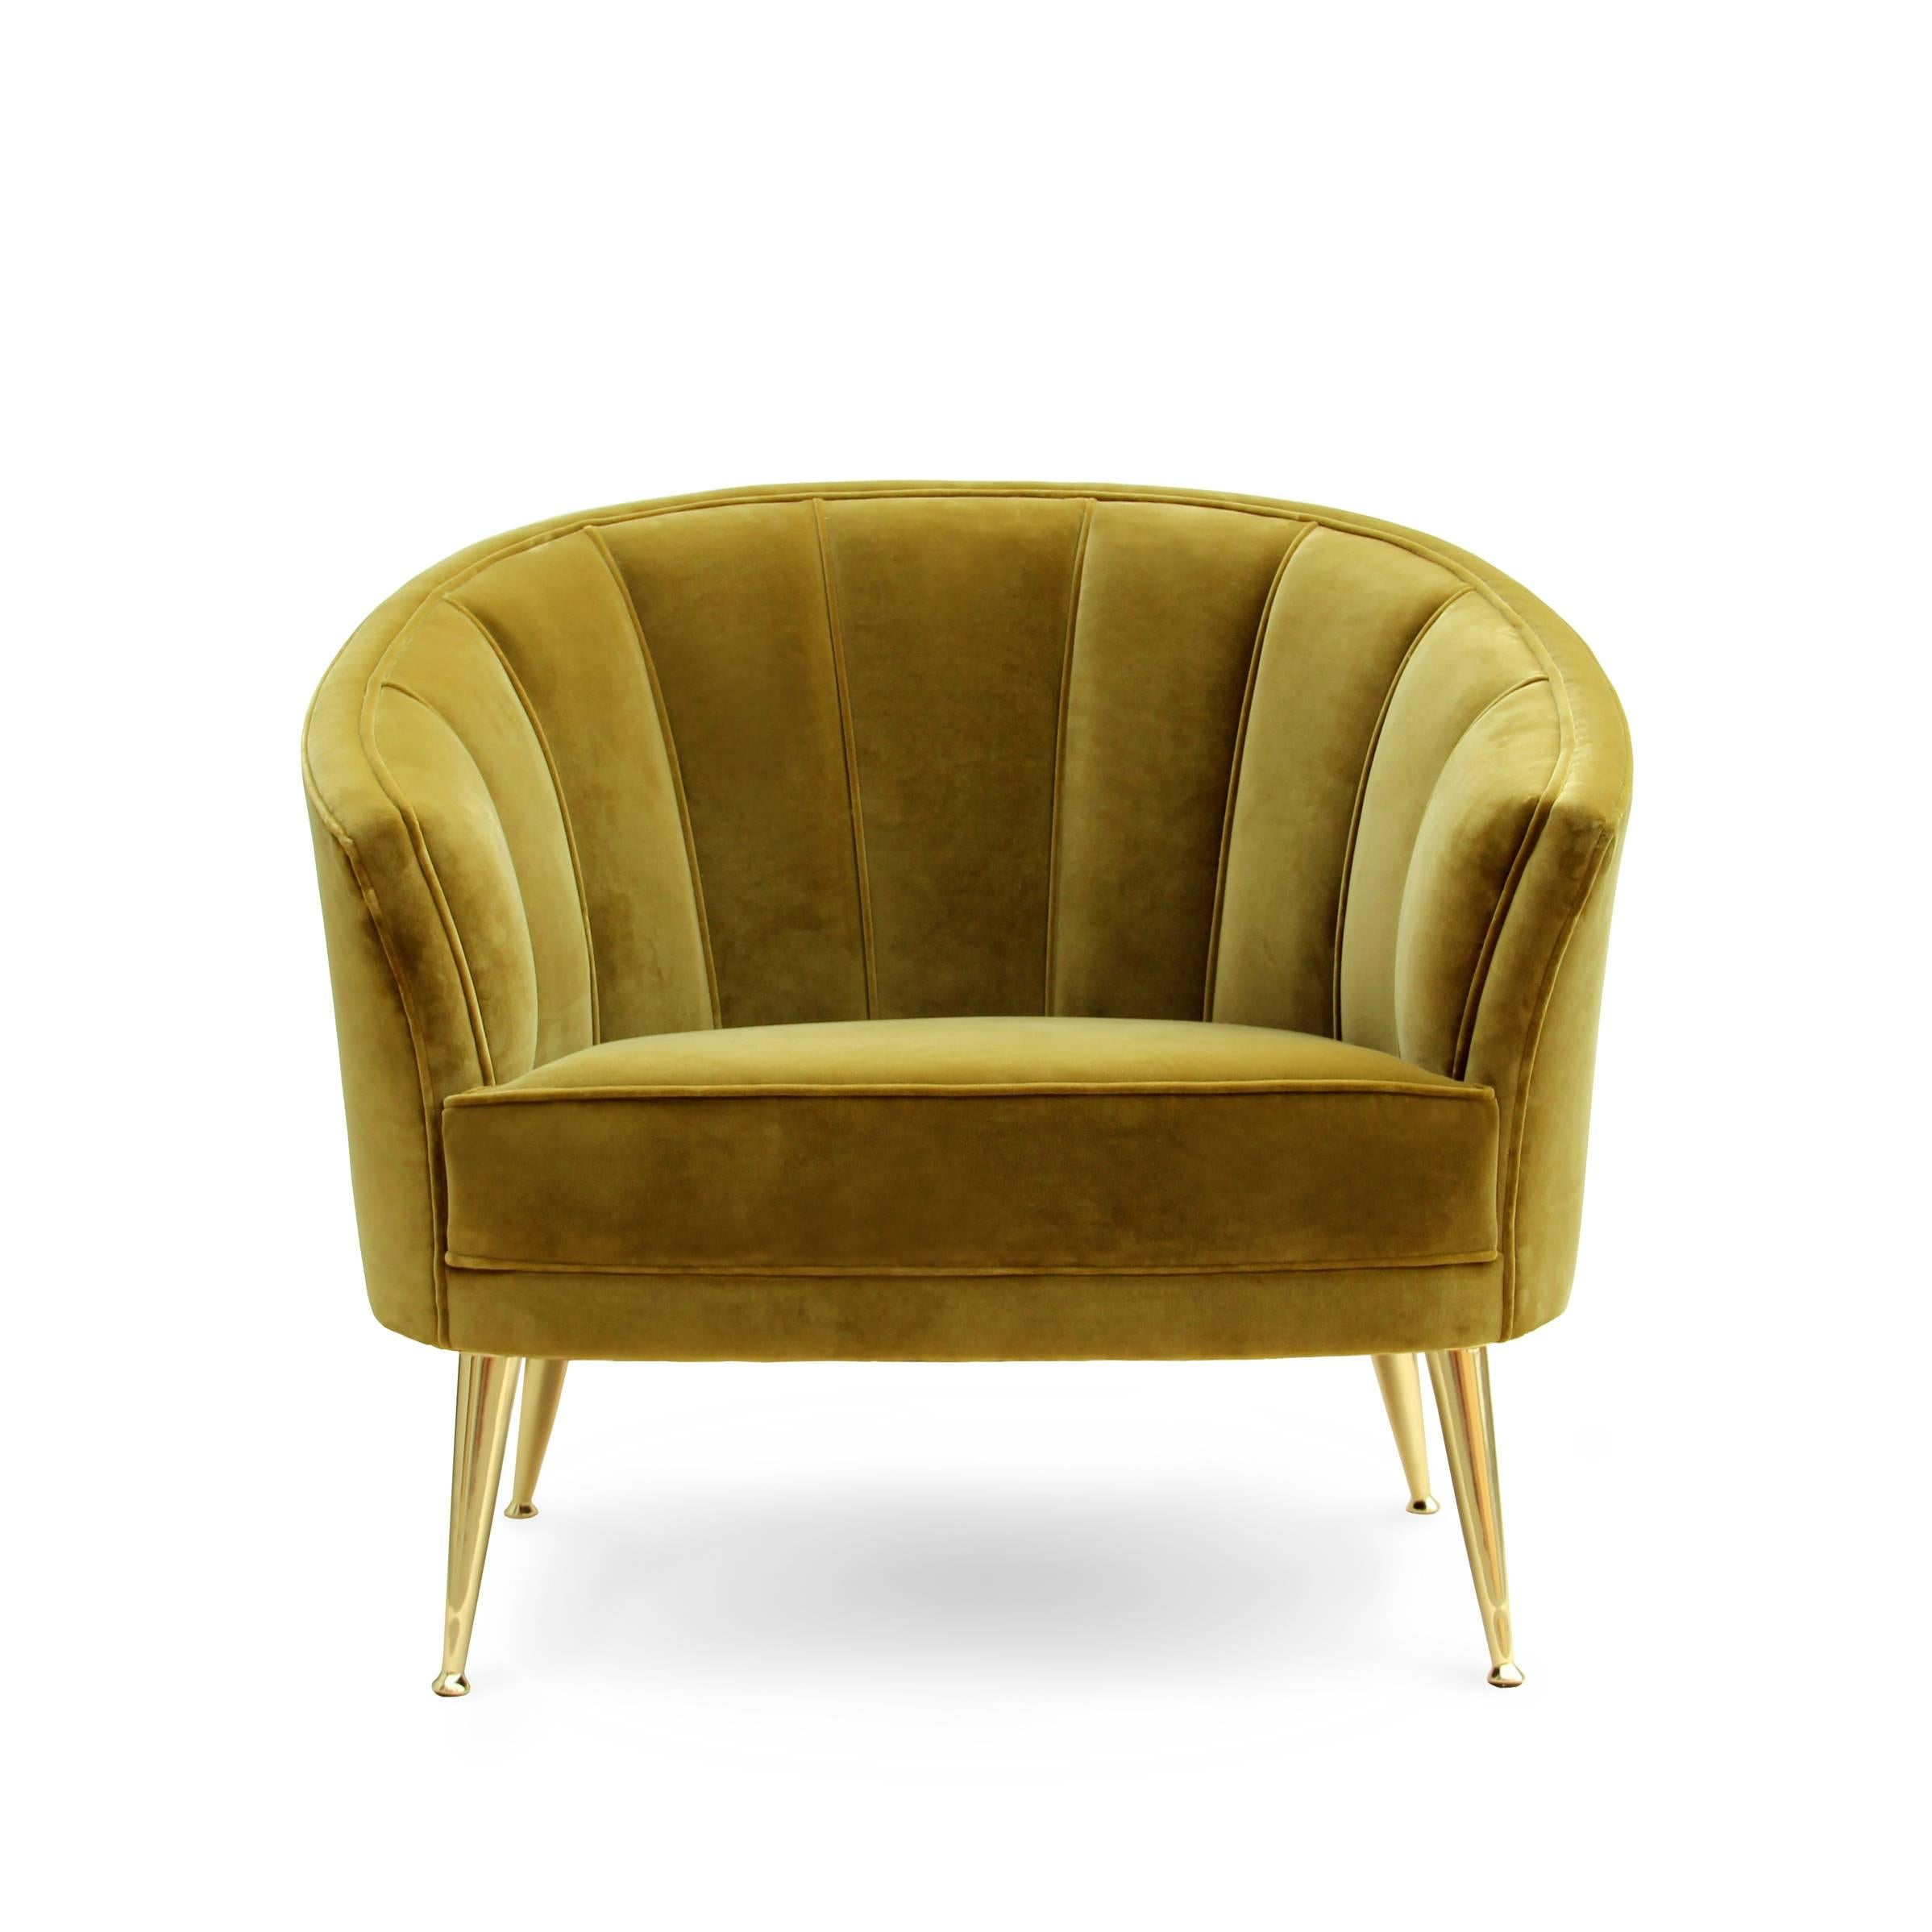 Armchair Arca with cotton velvet fabric
and aged brass feet. Also available with
other fabrics on request.
